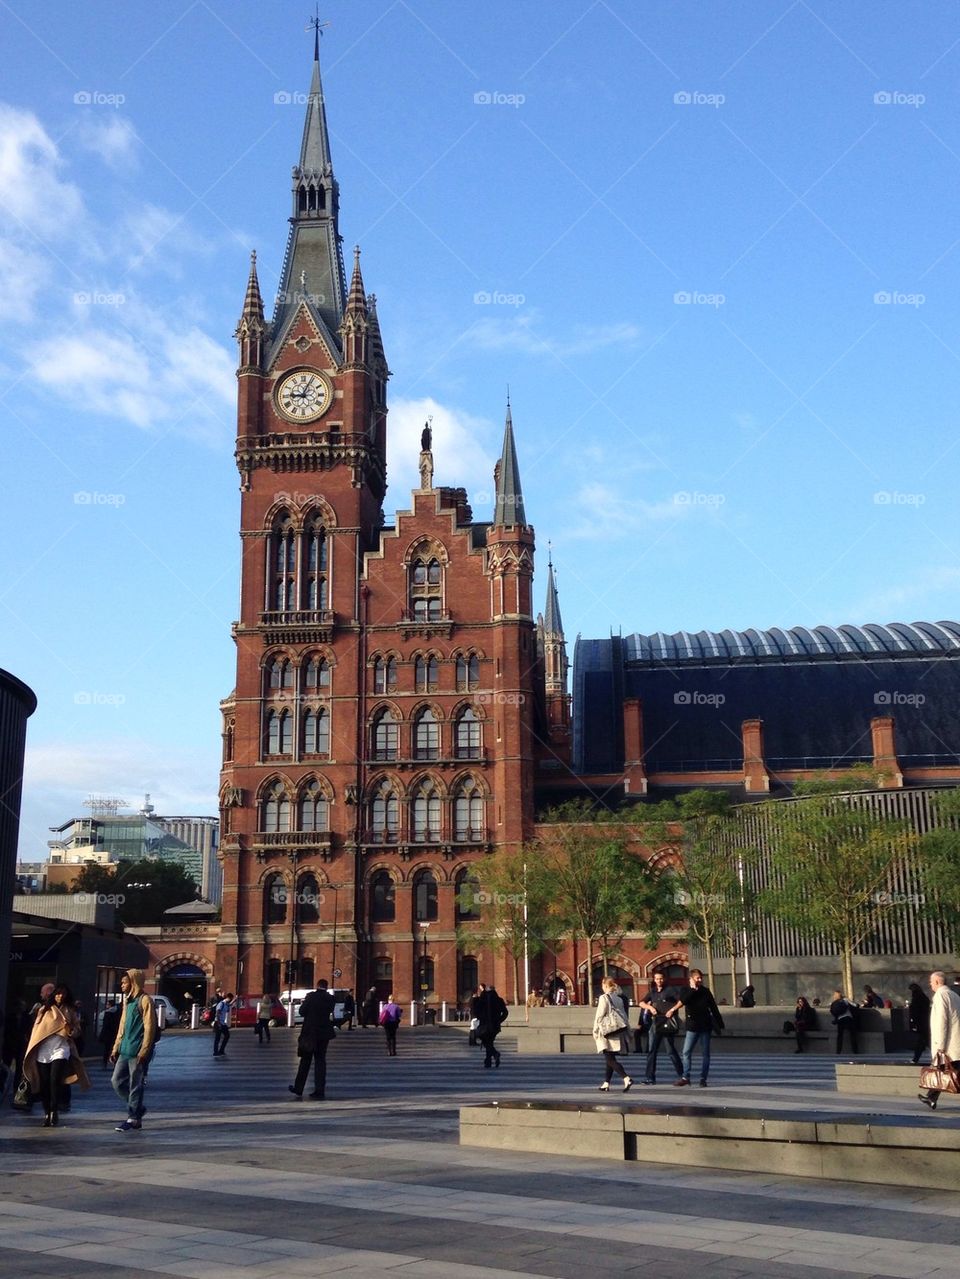 St Pancras in all glory 